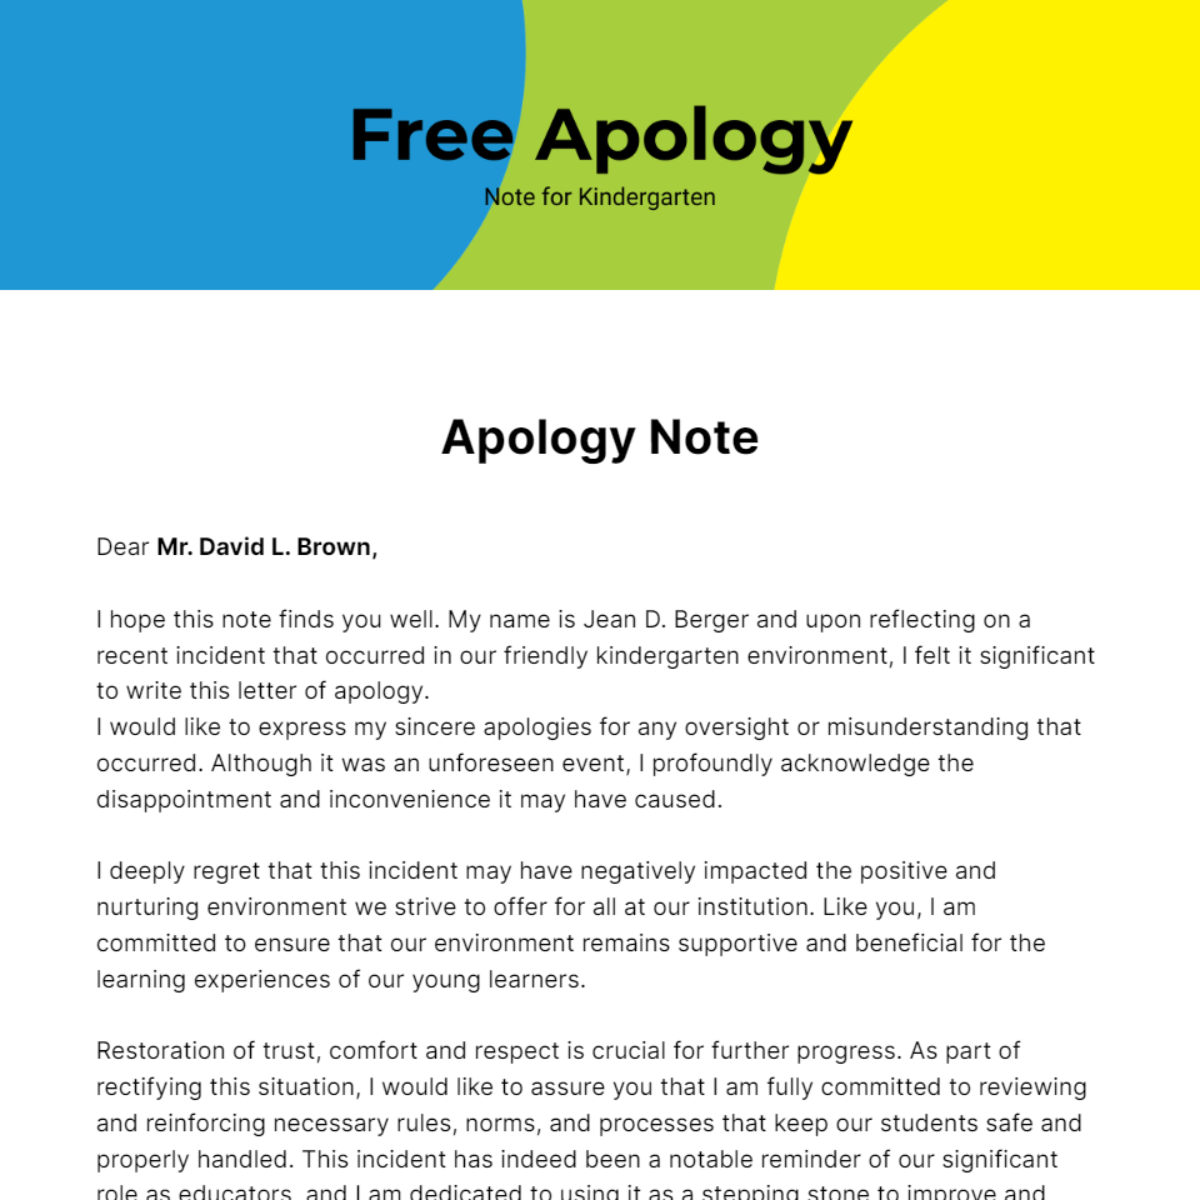 Apology Note for Kindergarten Template